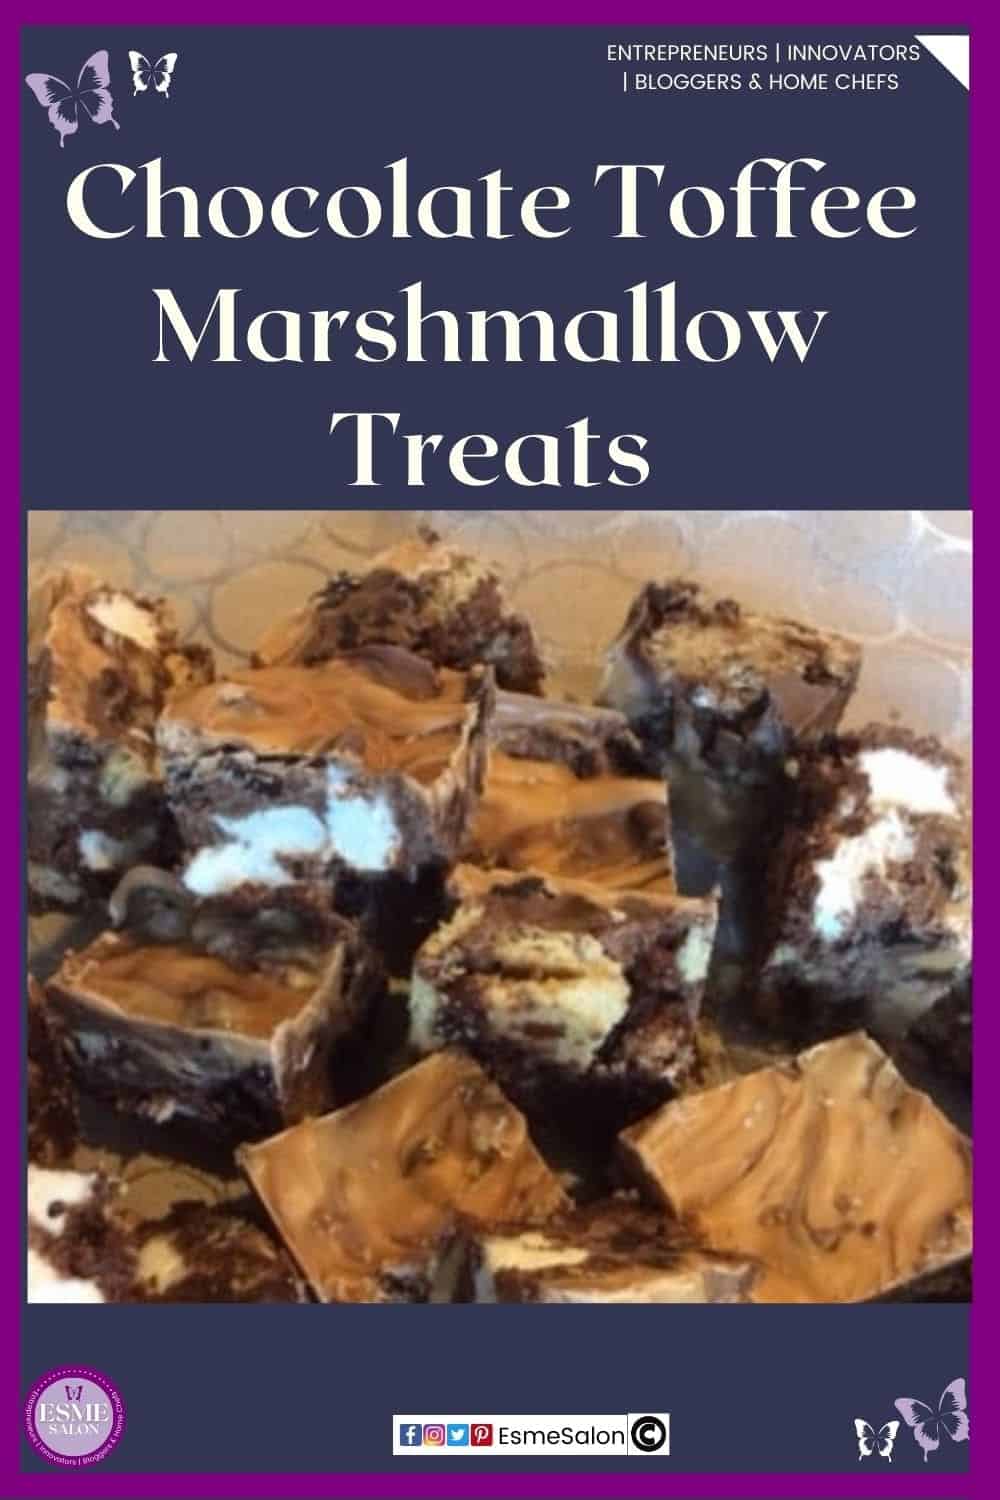 an image of Chocolate Toffee Marshmallow Treats